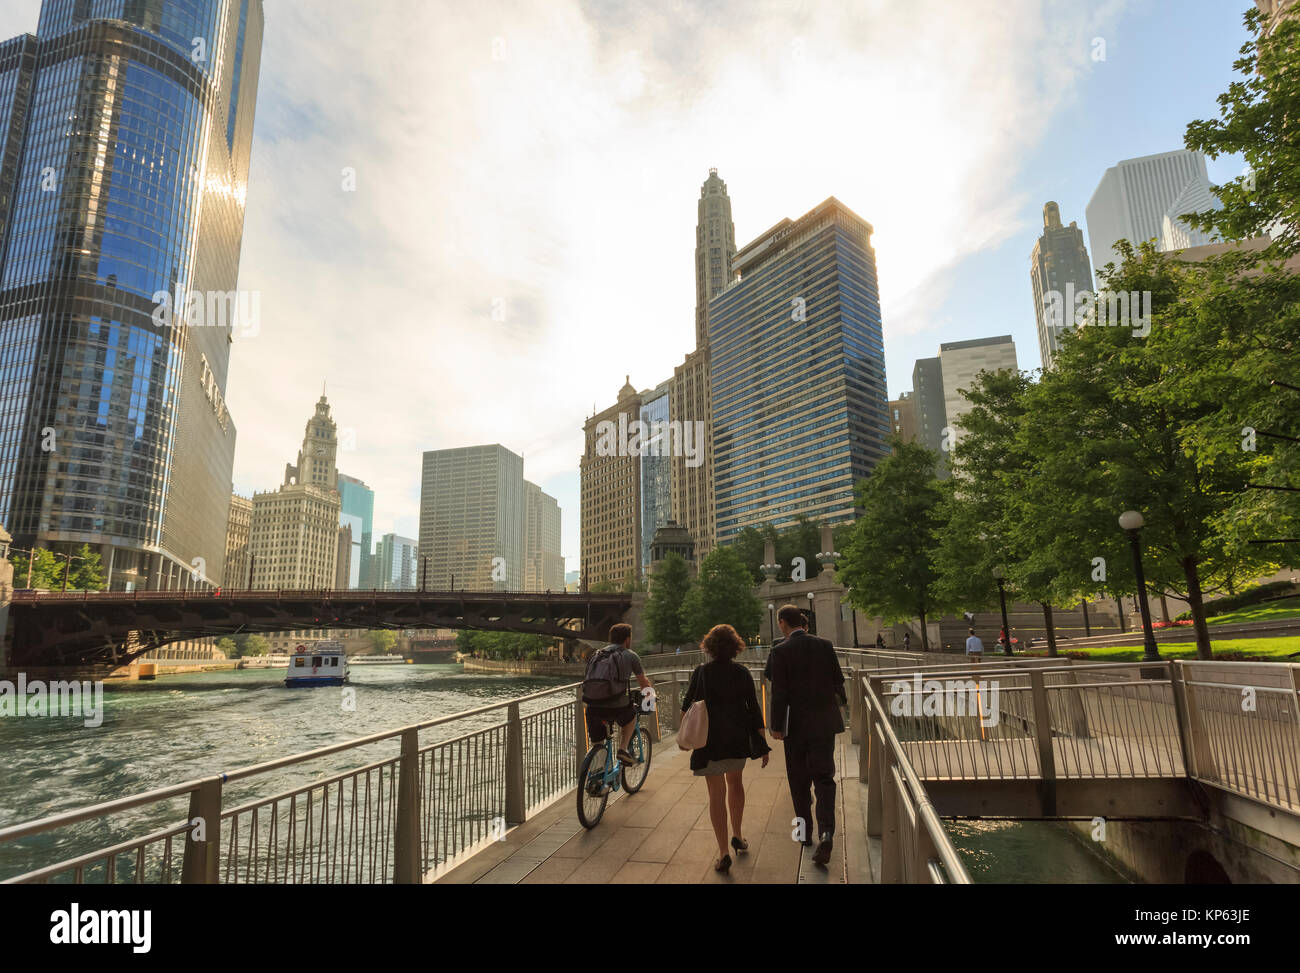 People on Chicago River Walk with skyline and Chicago River, Chicago, Illinois, USA Stock Photo